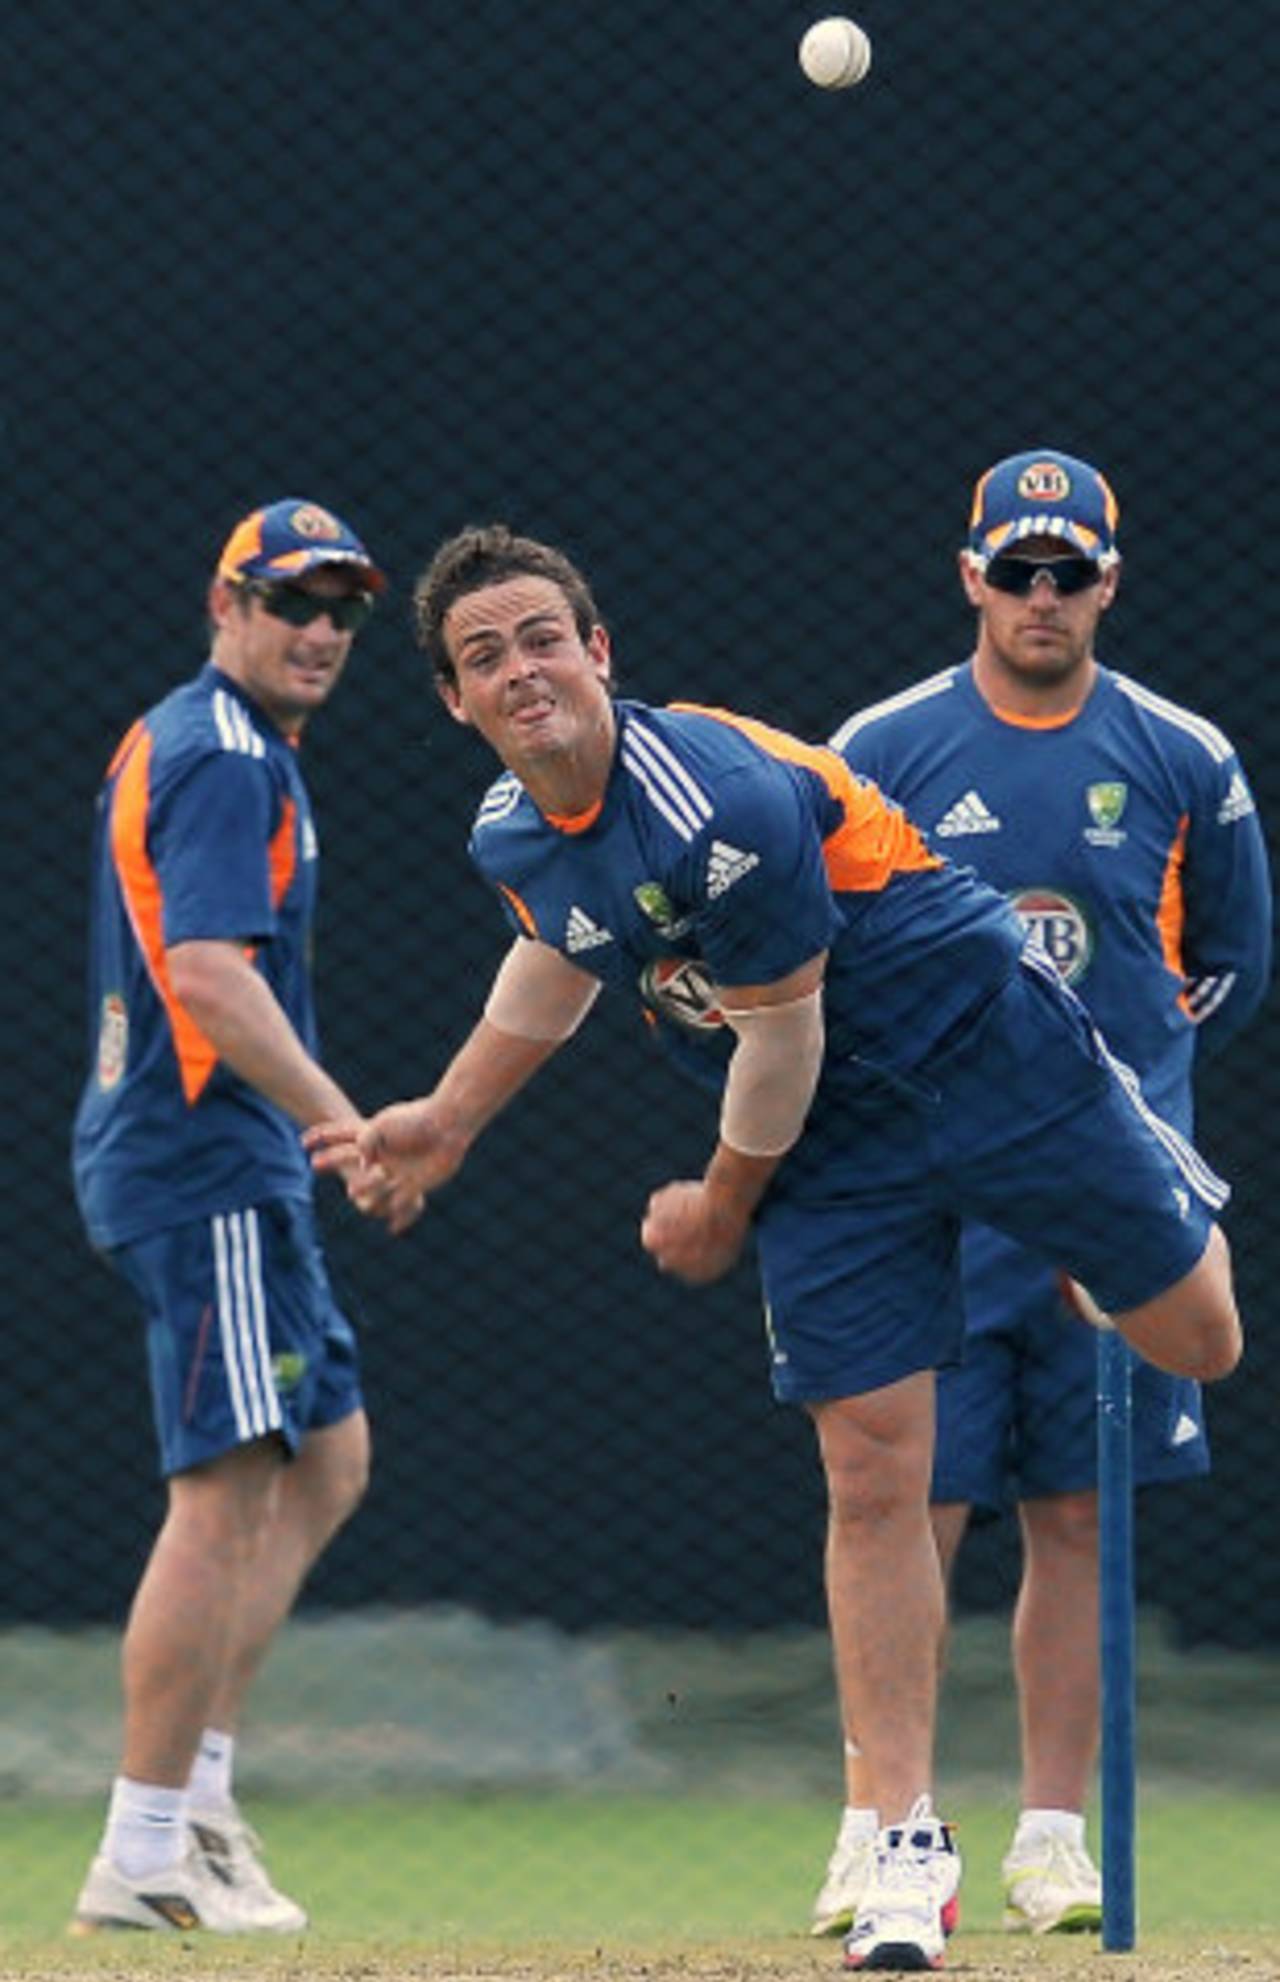 Steve O'Keefe bowls in the nets during a training session in Pallekele, August 4, 2011